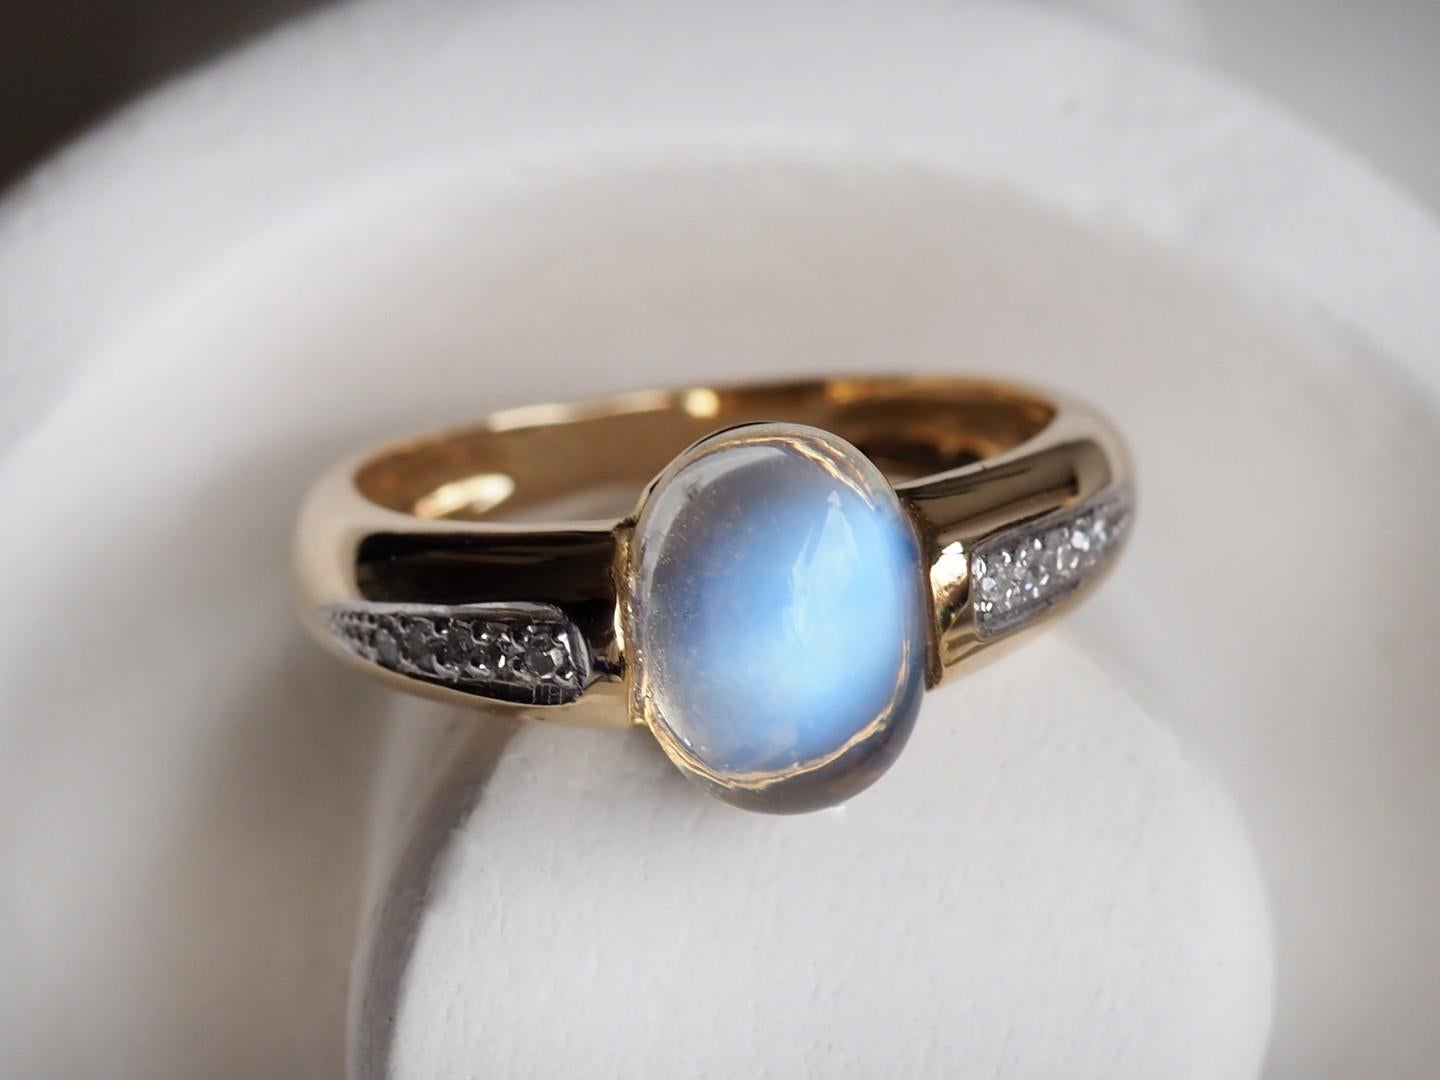 14K yellow gold ring with natural adularia moonstone highest jewelry quality and diamonds

moonstone origin - India

stone measurements - 0.16 x 0.28 x 0.39 in / 4 x 7 x 10 mm

stone weight - 2.06 carats

10 diamonds round cut 17